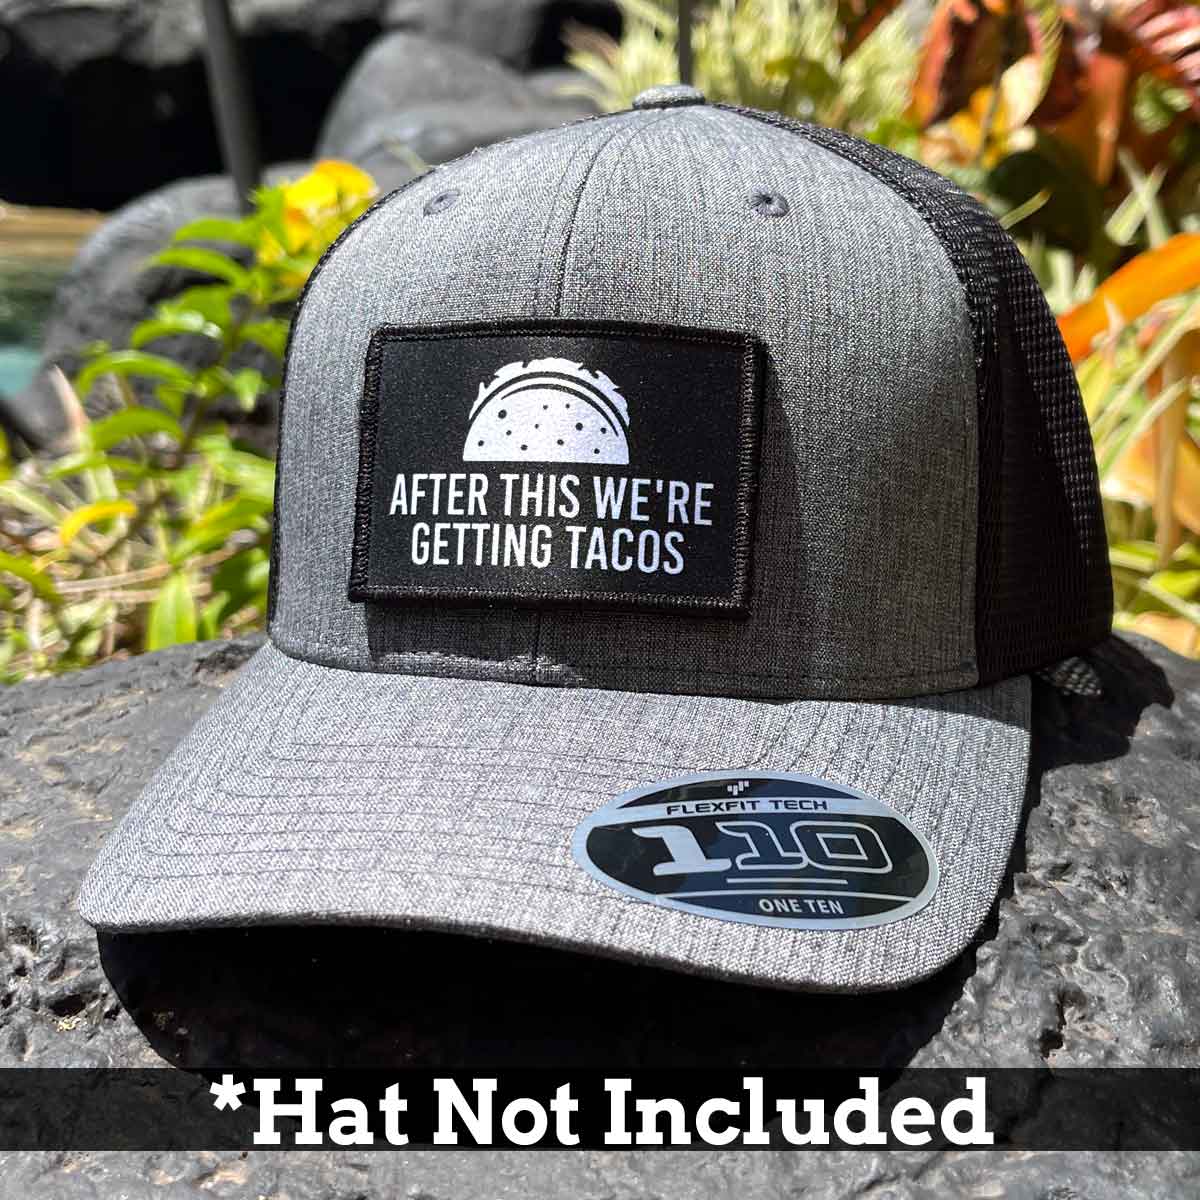 After This We're Getting Tacos - Removable Patch - Pull Patch - Removable Patches For Authentic Flexfit and Snapback Hats